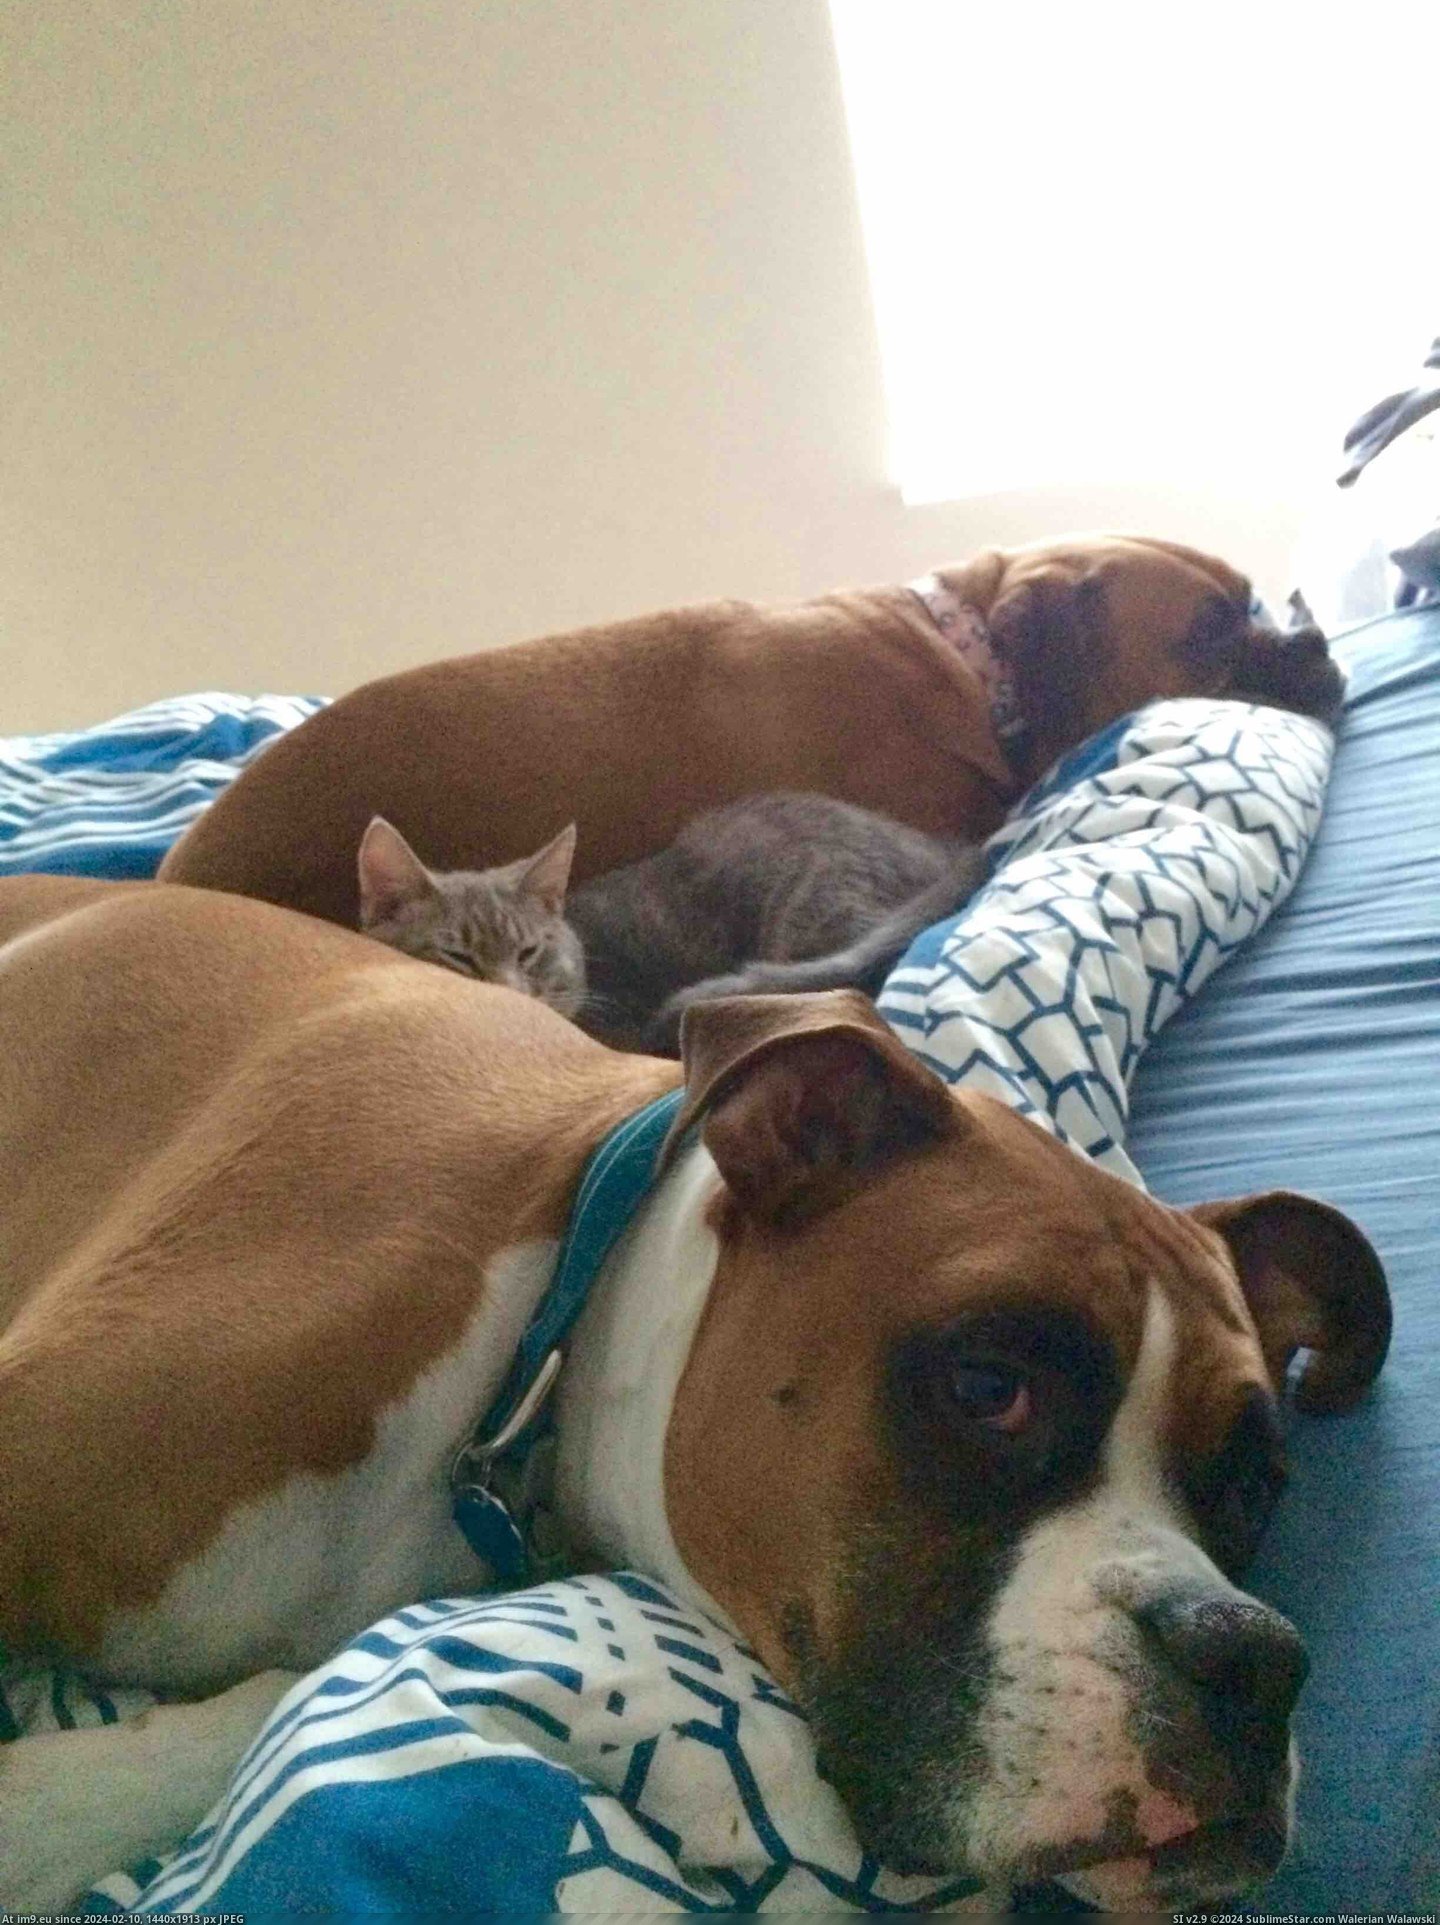 #Feel #Sick #Crew #Afternoon [Aww] Went home sick yesterday, this was my feel better crew all afternoon. Pic. (Bild von album My r/AWW favs))